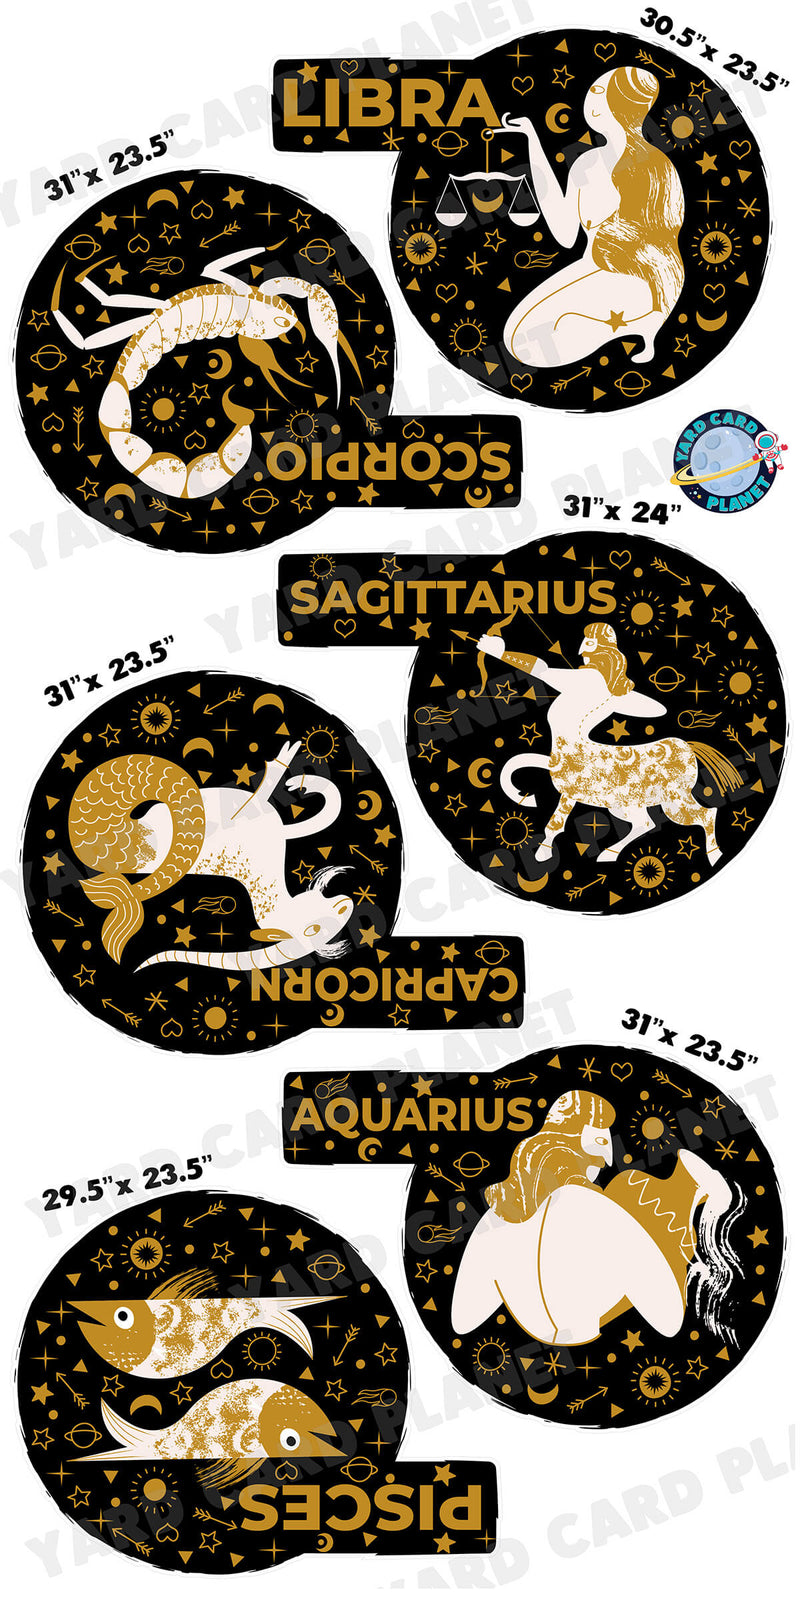 Eclectic Zodiac Signs Yard Card Flair Set - Part 2 with Measurements